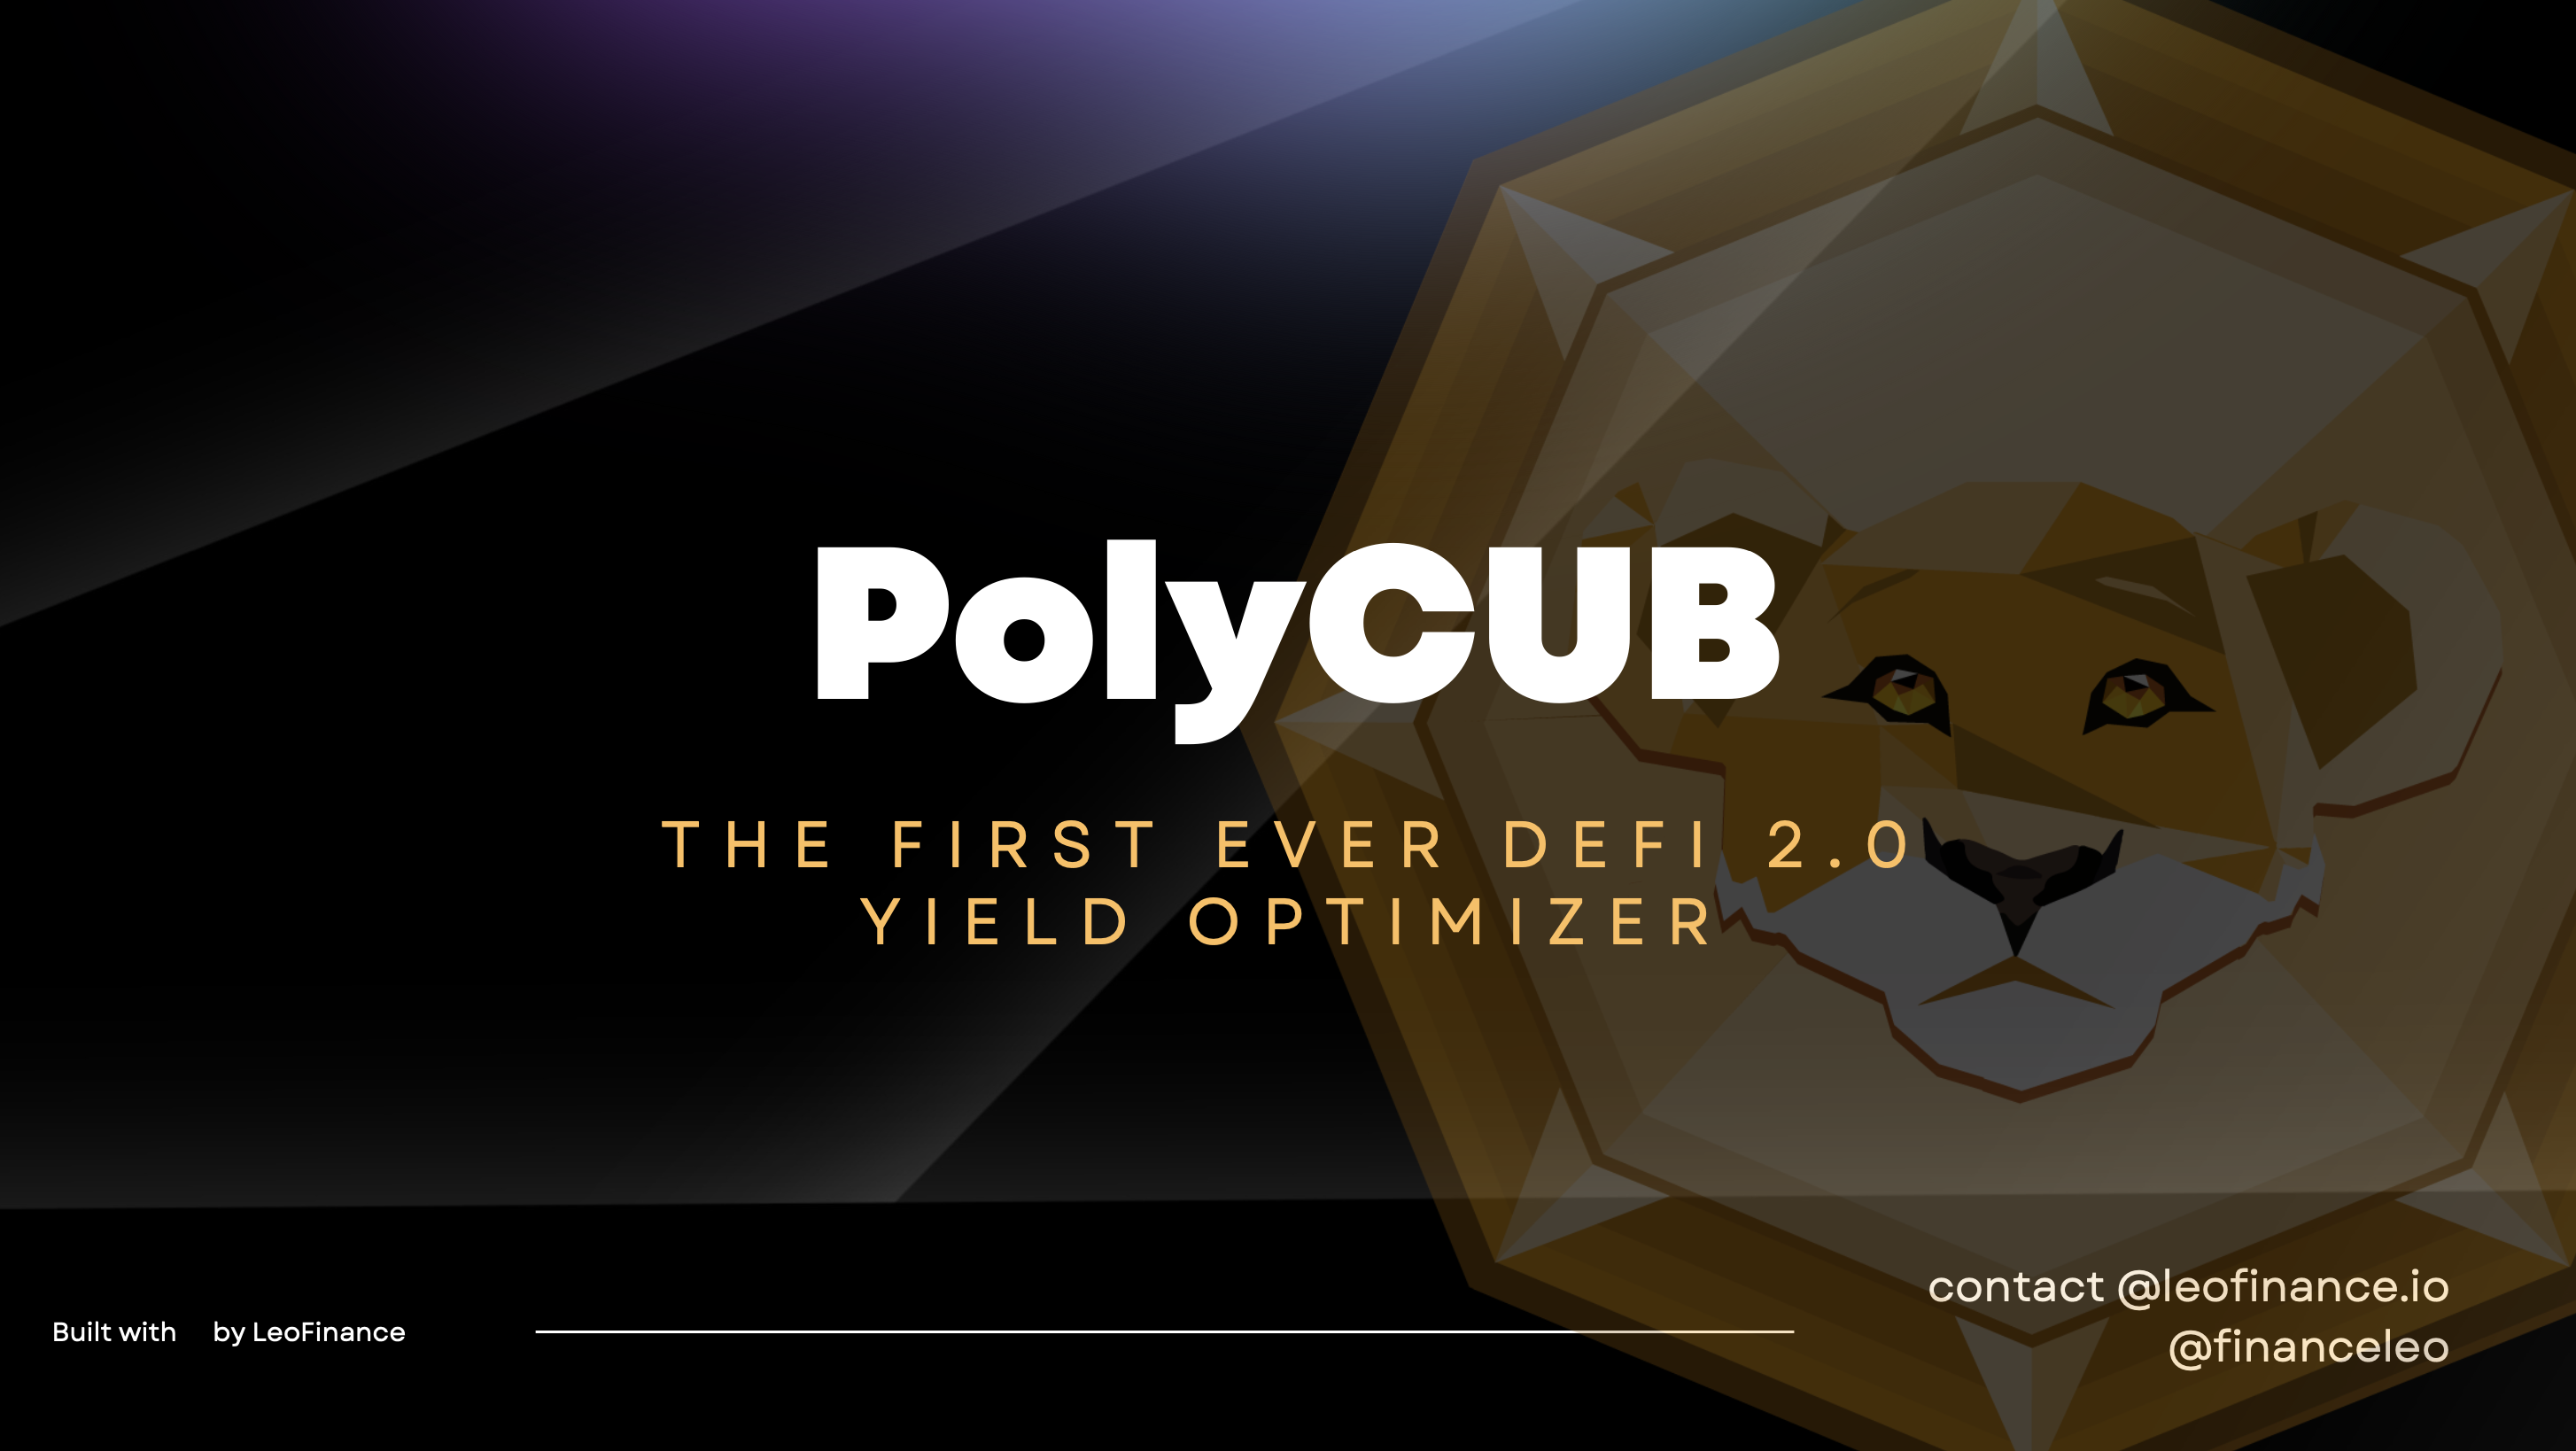 @leofinance/polycub-pitch-deck-onboarding-venture-capital-to-our-ecosystem-via-the-hardest-defi-asset-out-there